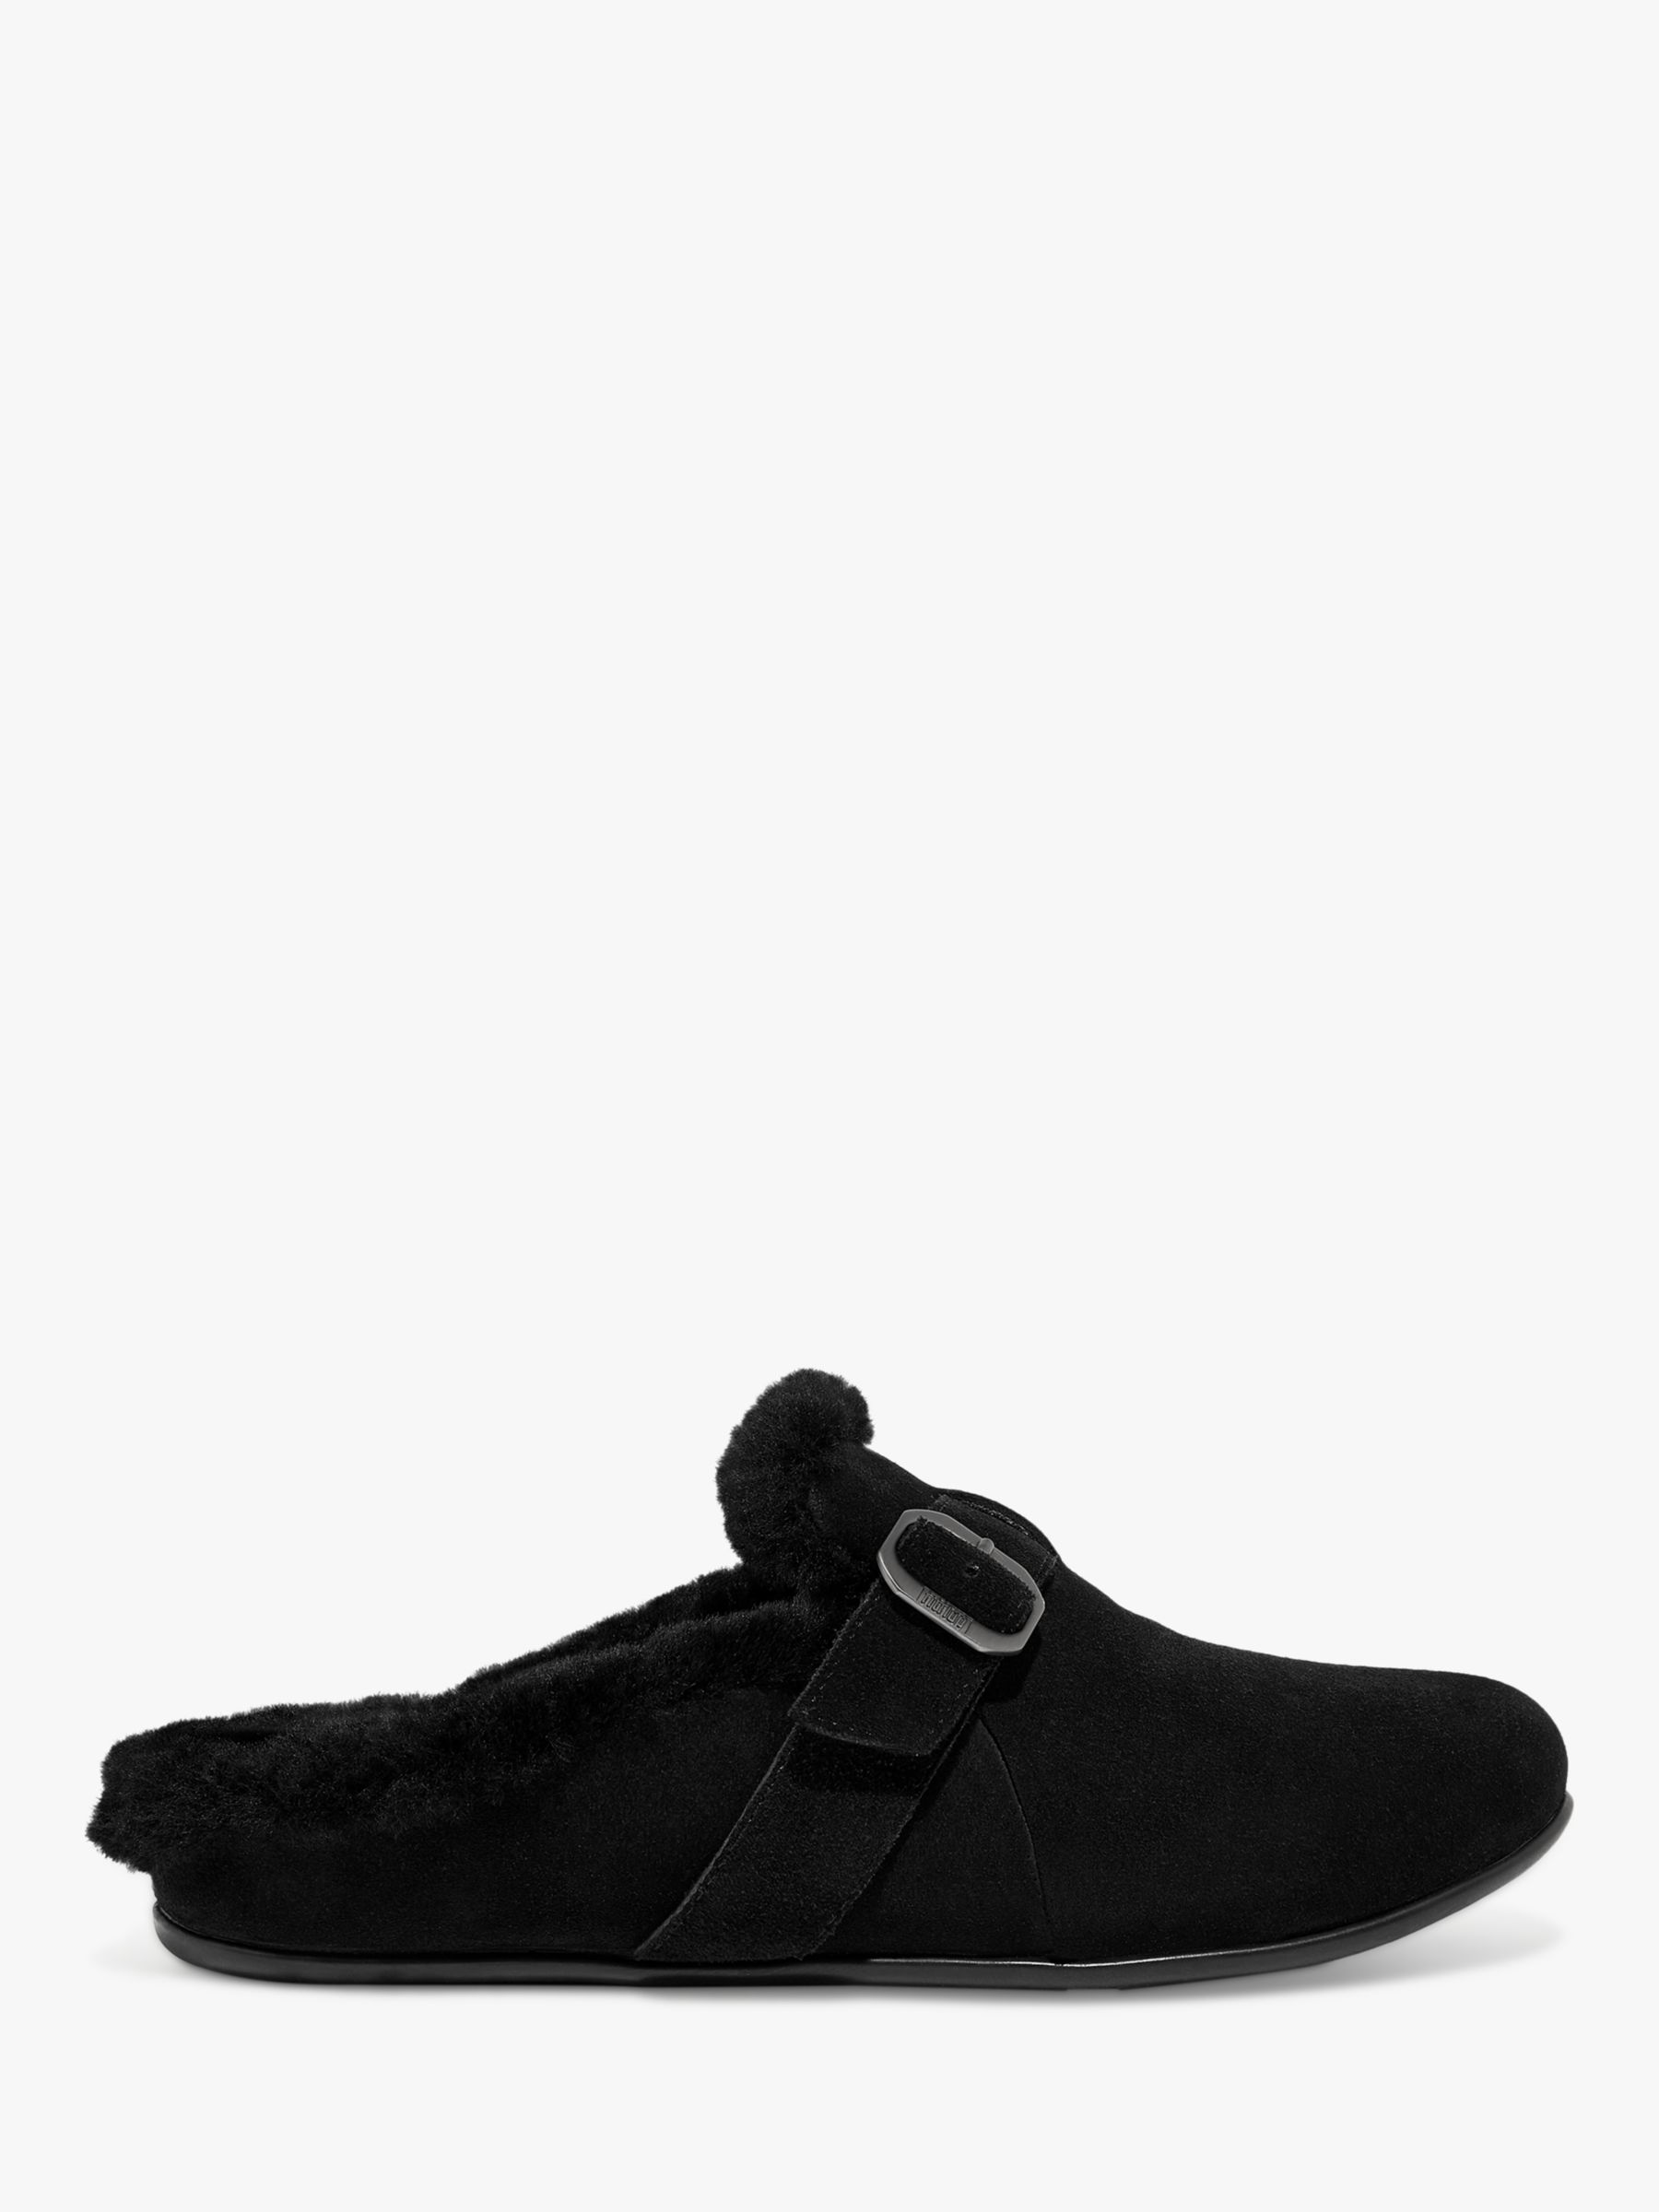 FitFlop Chrissie Shearling Lined Suede Slippers, Black, 6